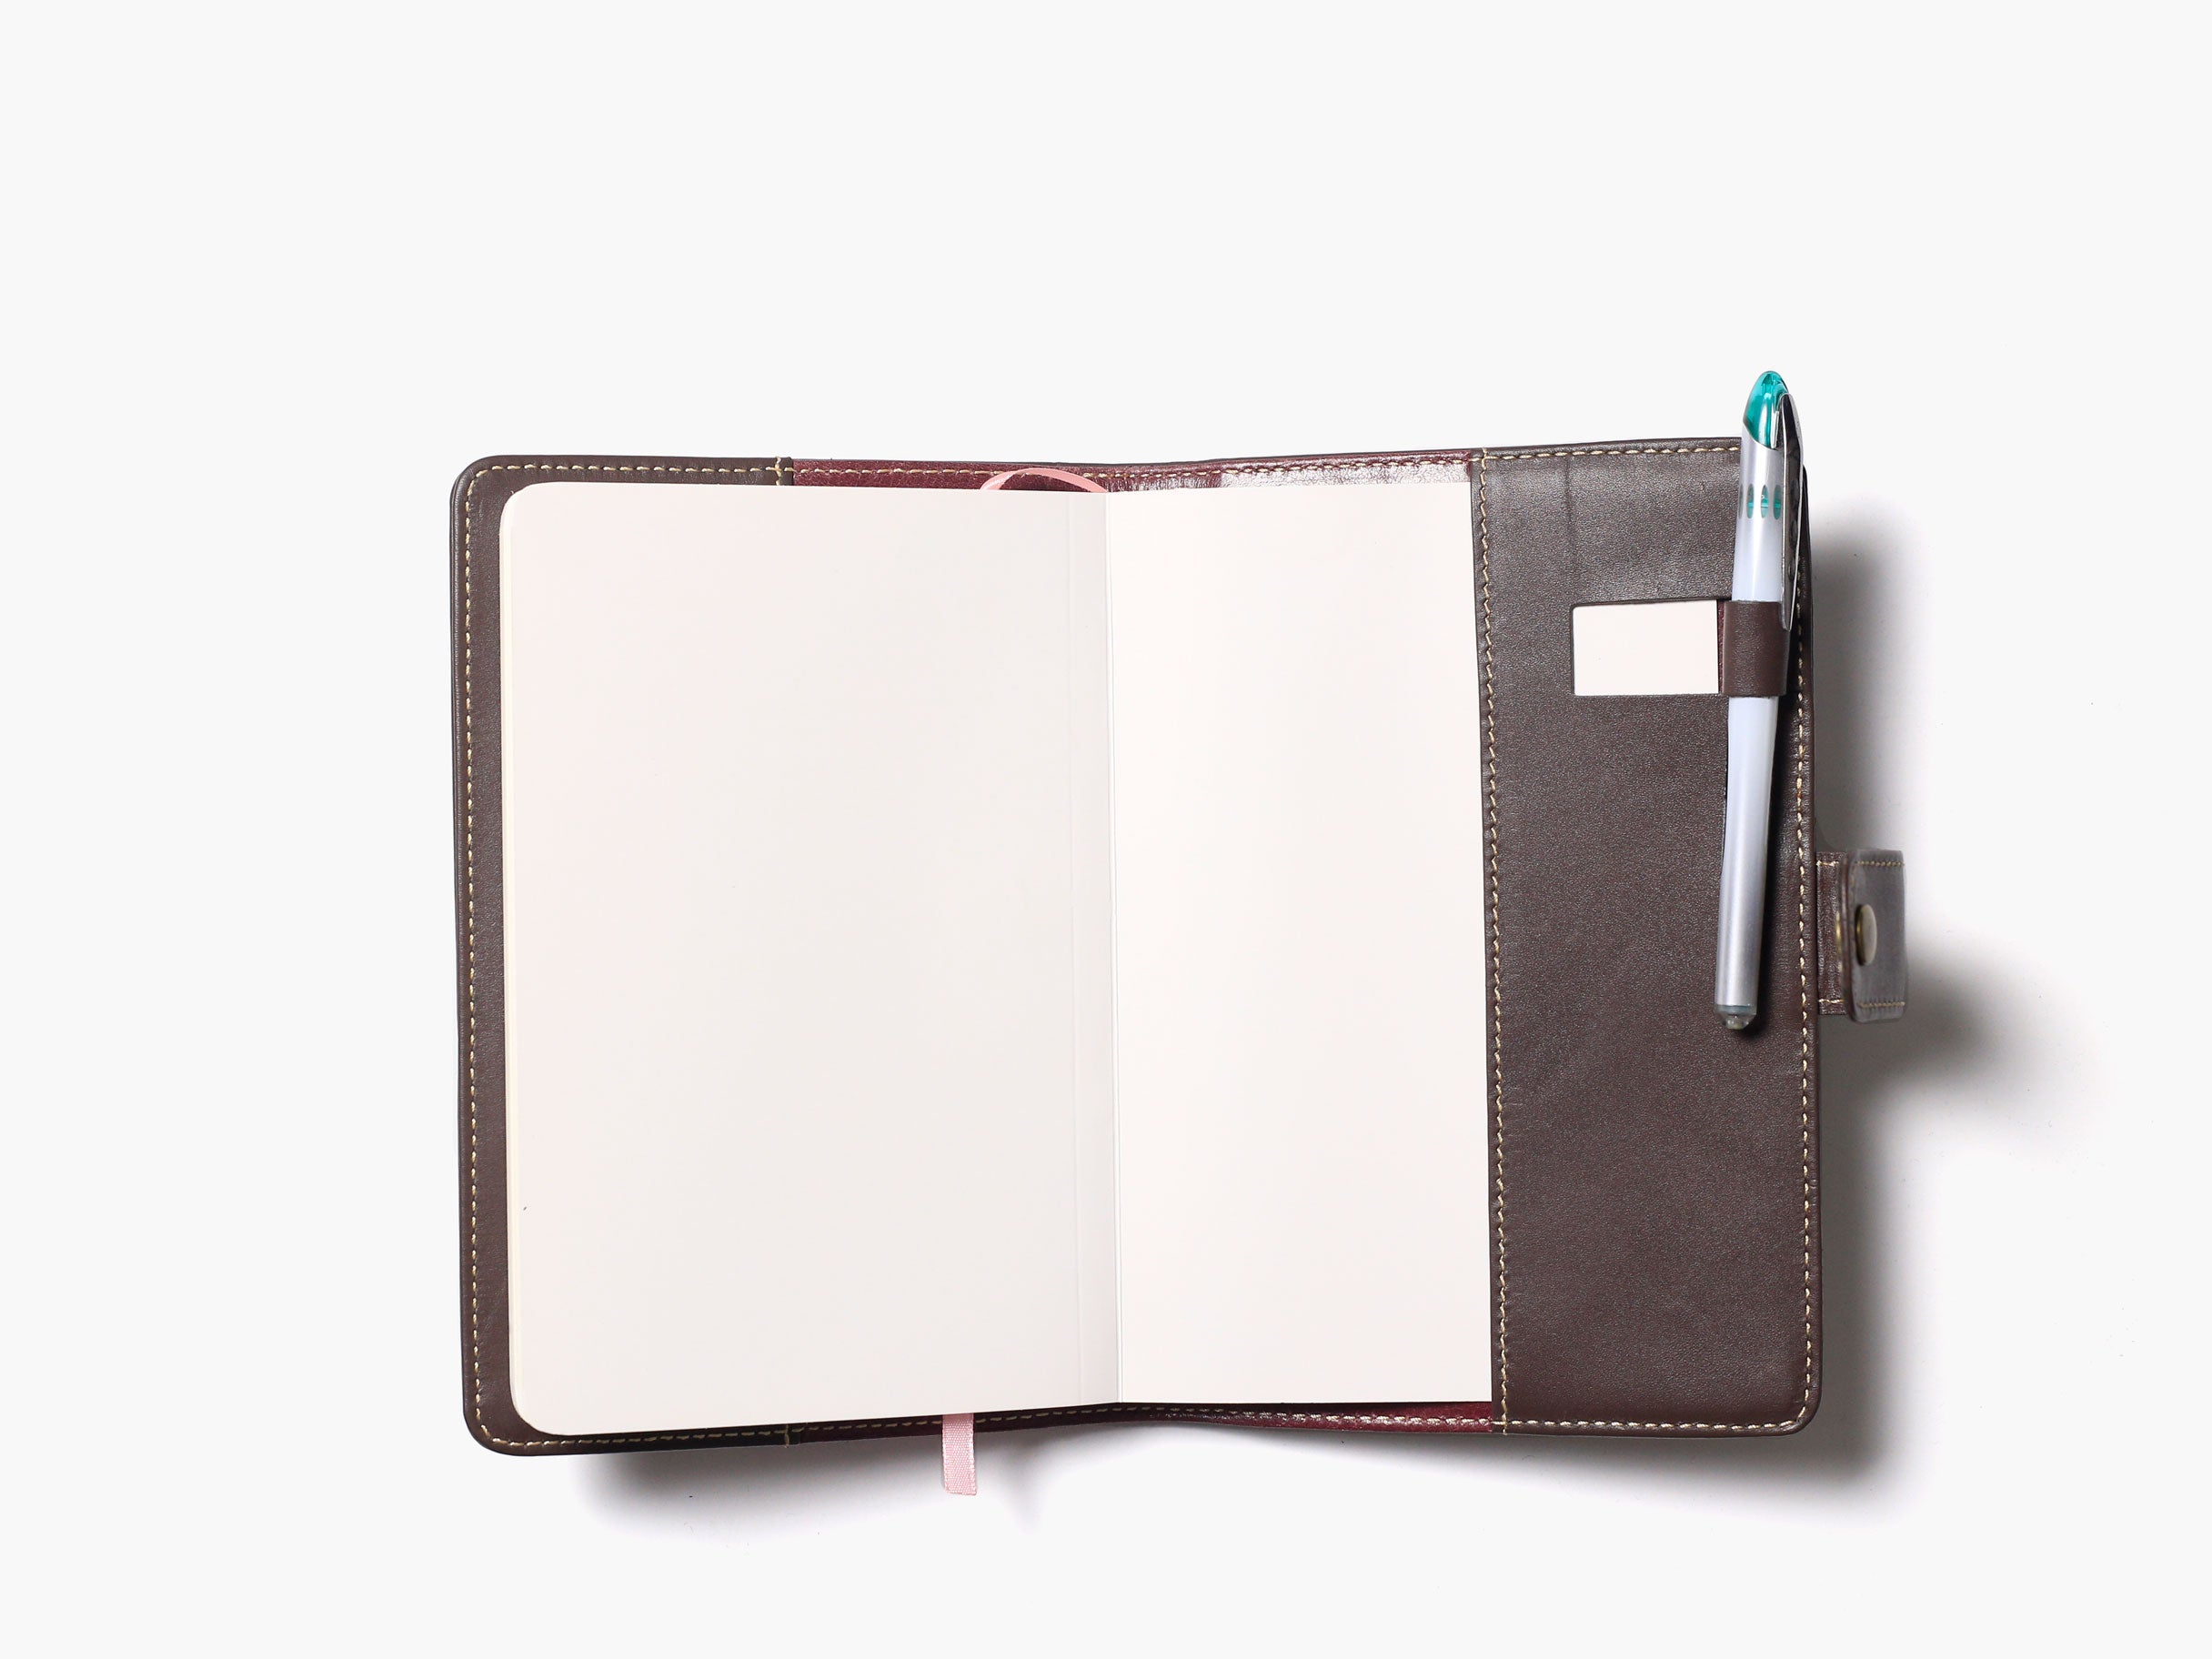 The Leather Journal